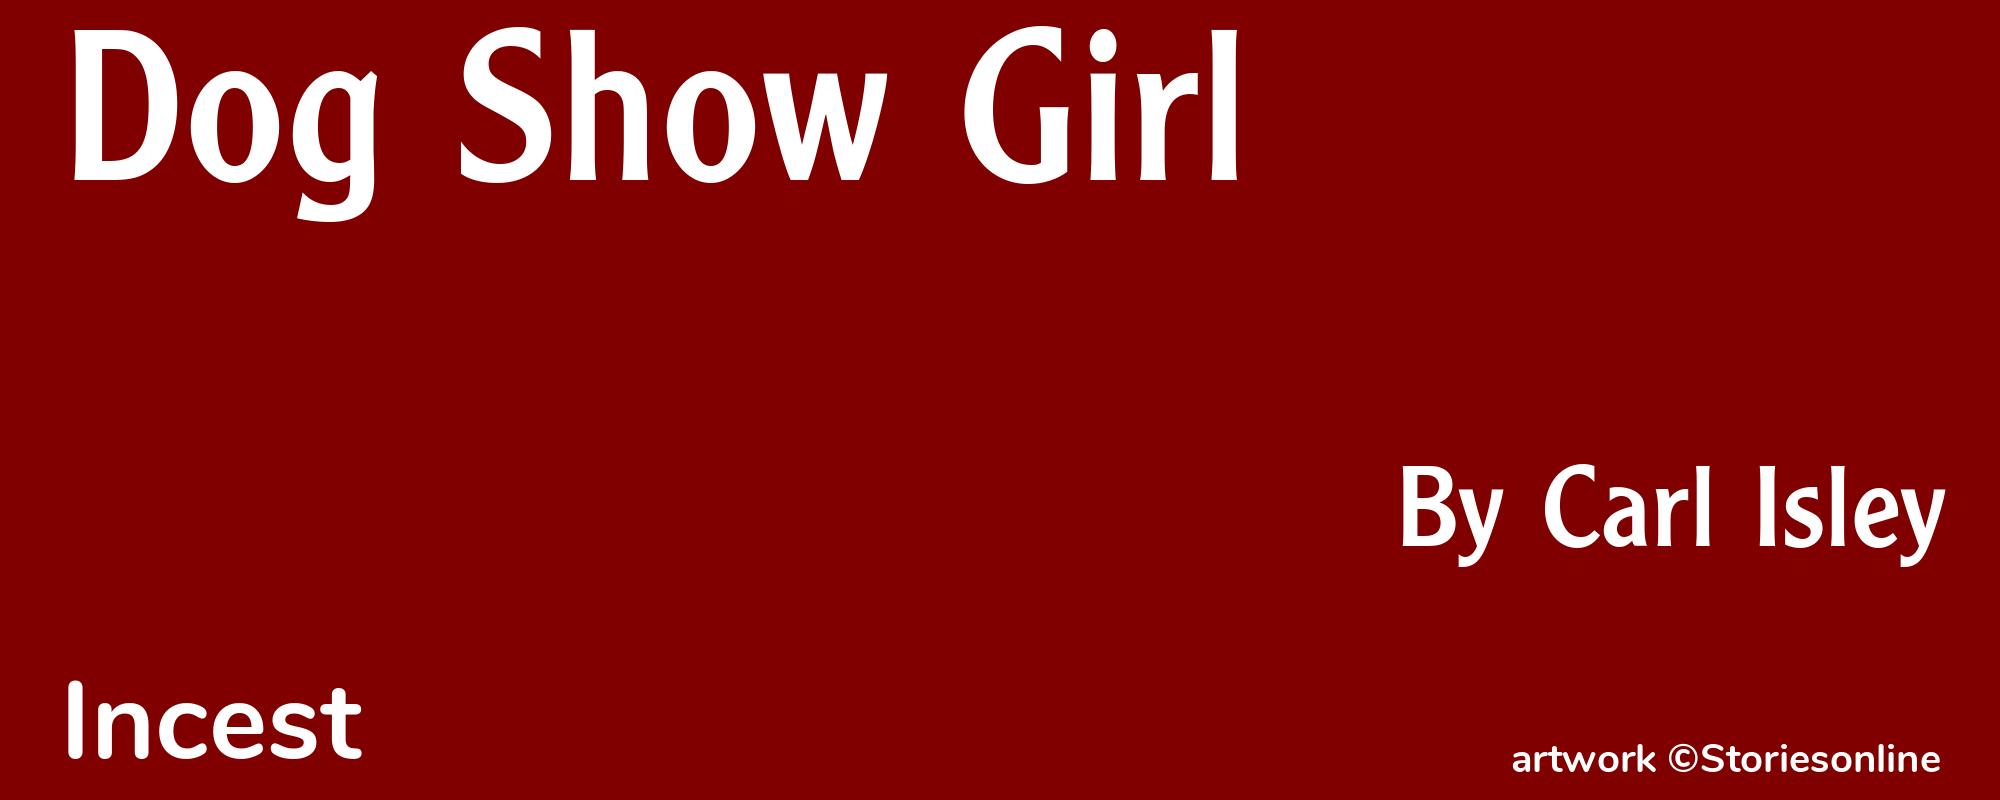 Dog Show Girl - Cover